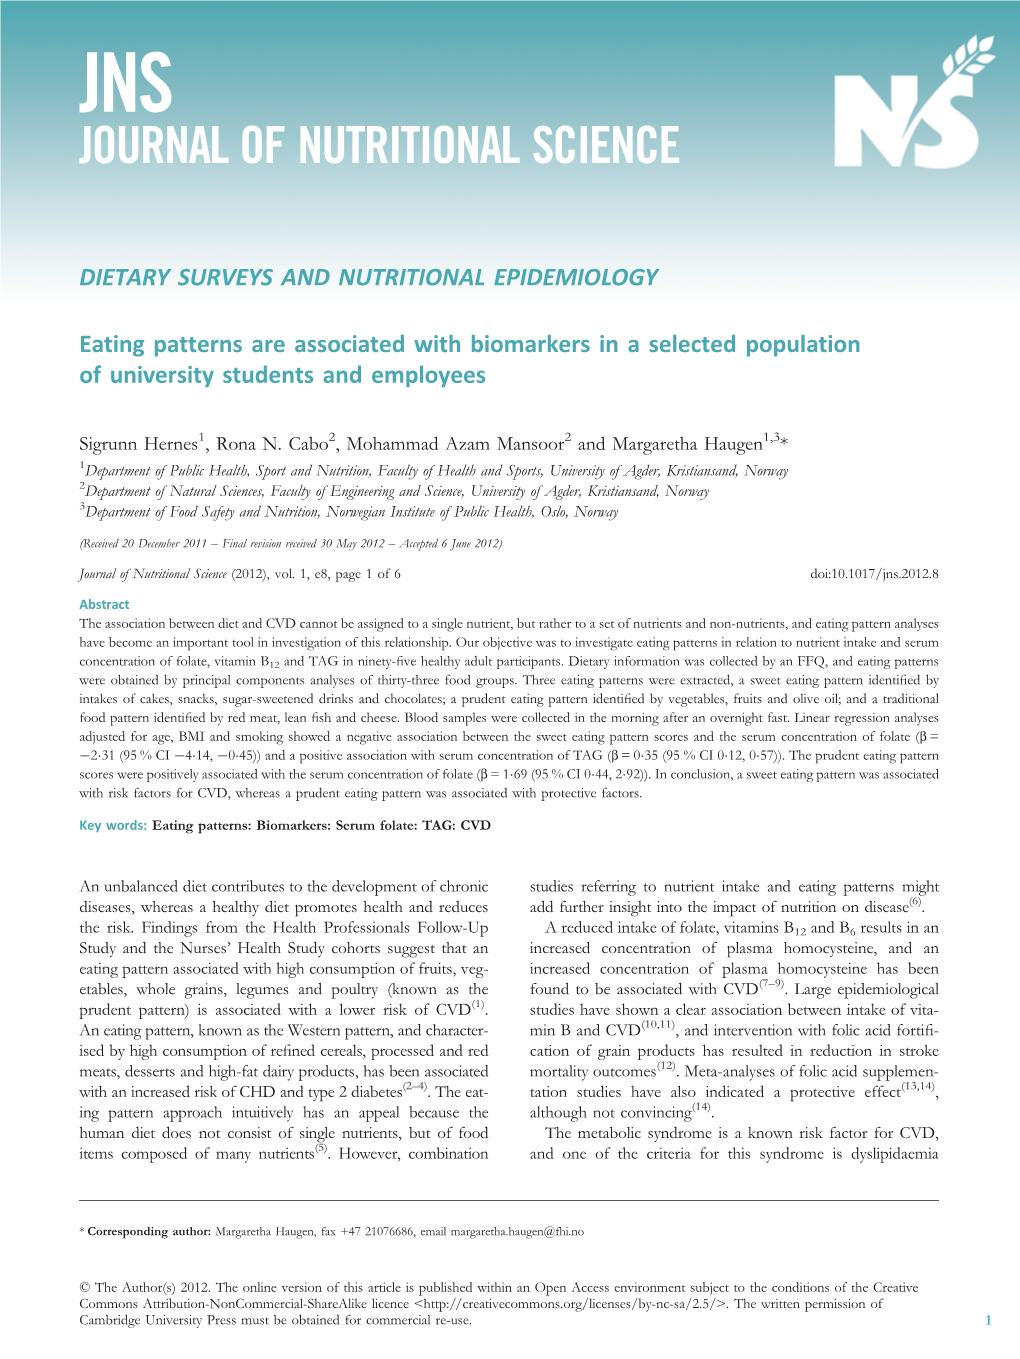 Jns Journal of Nutritional Science